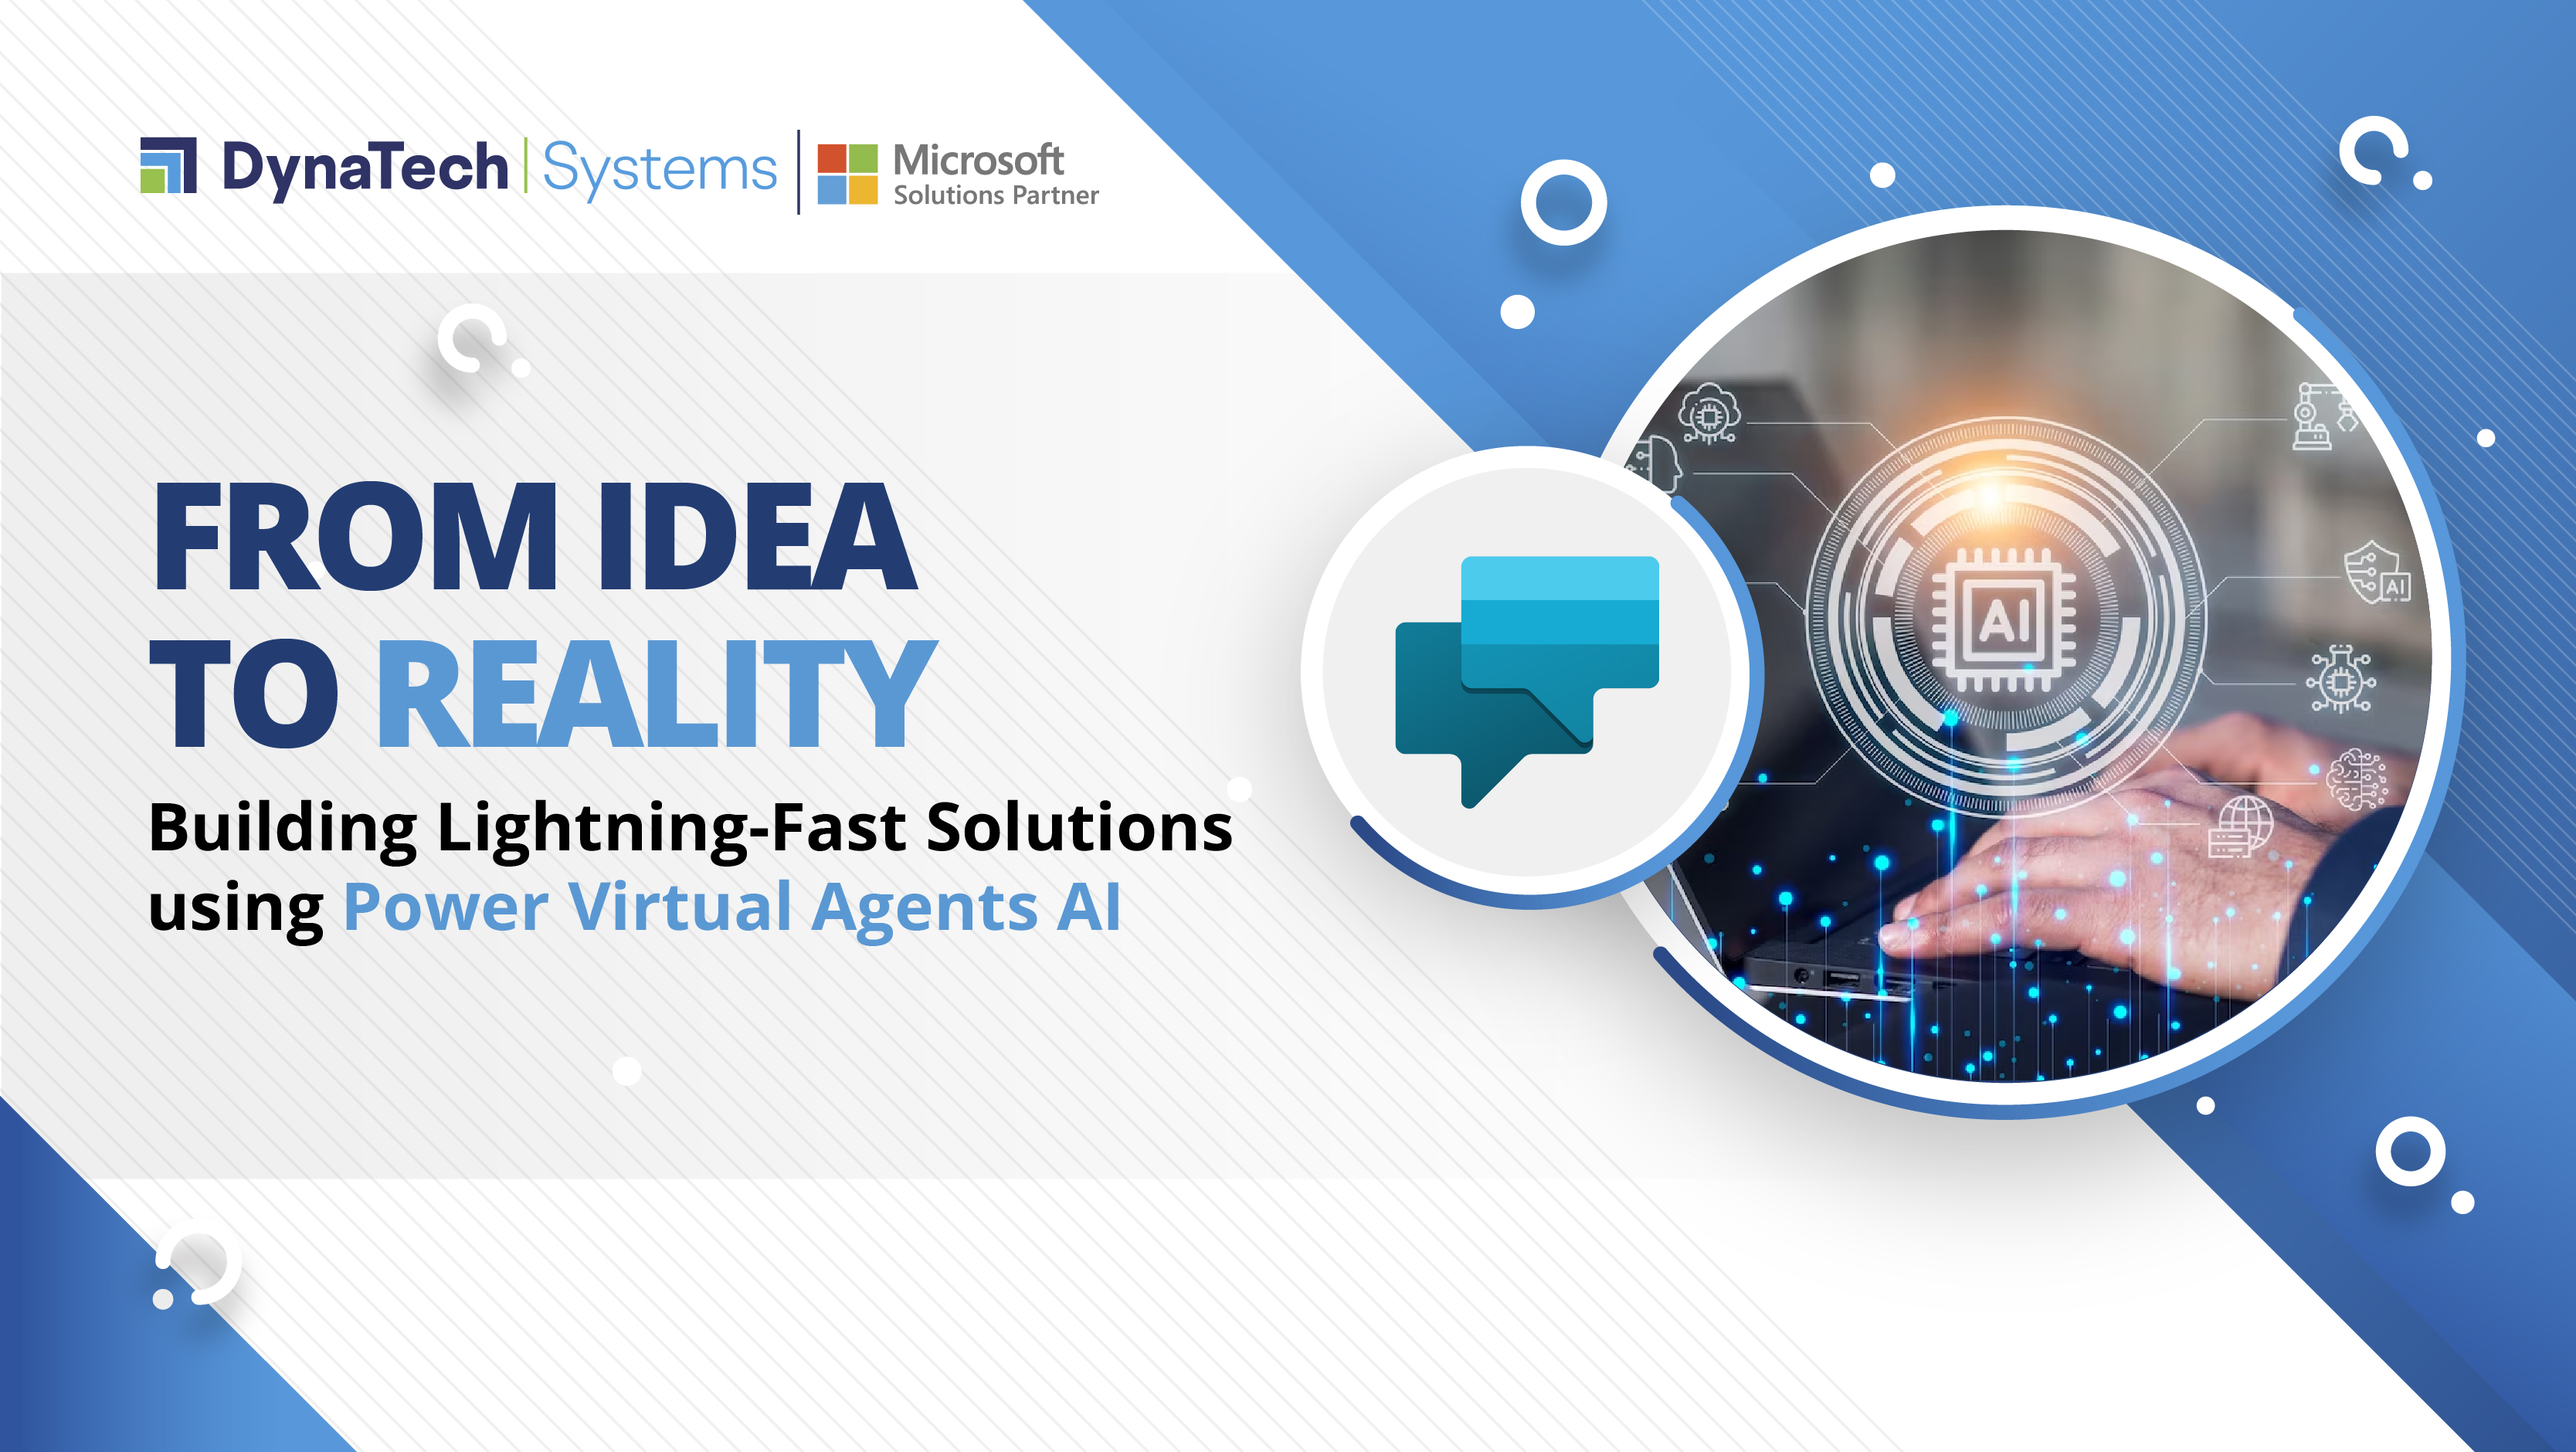 From Idea to Reality: Building Lightning-Fast Solutions using Power Virtual Agents AI